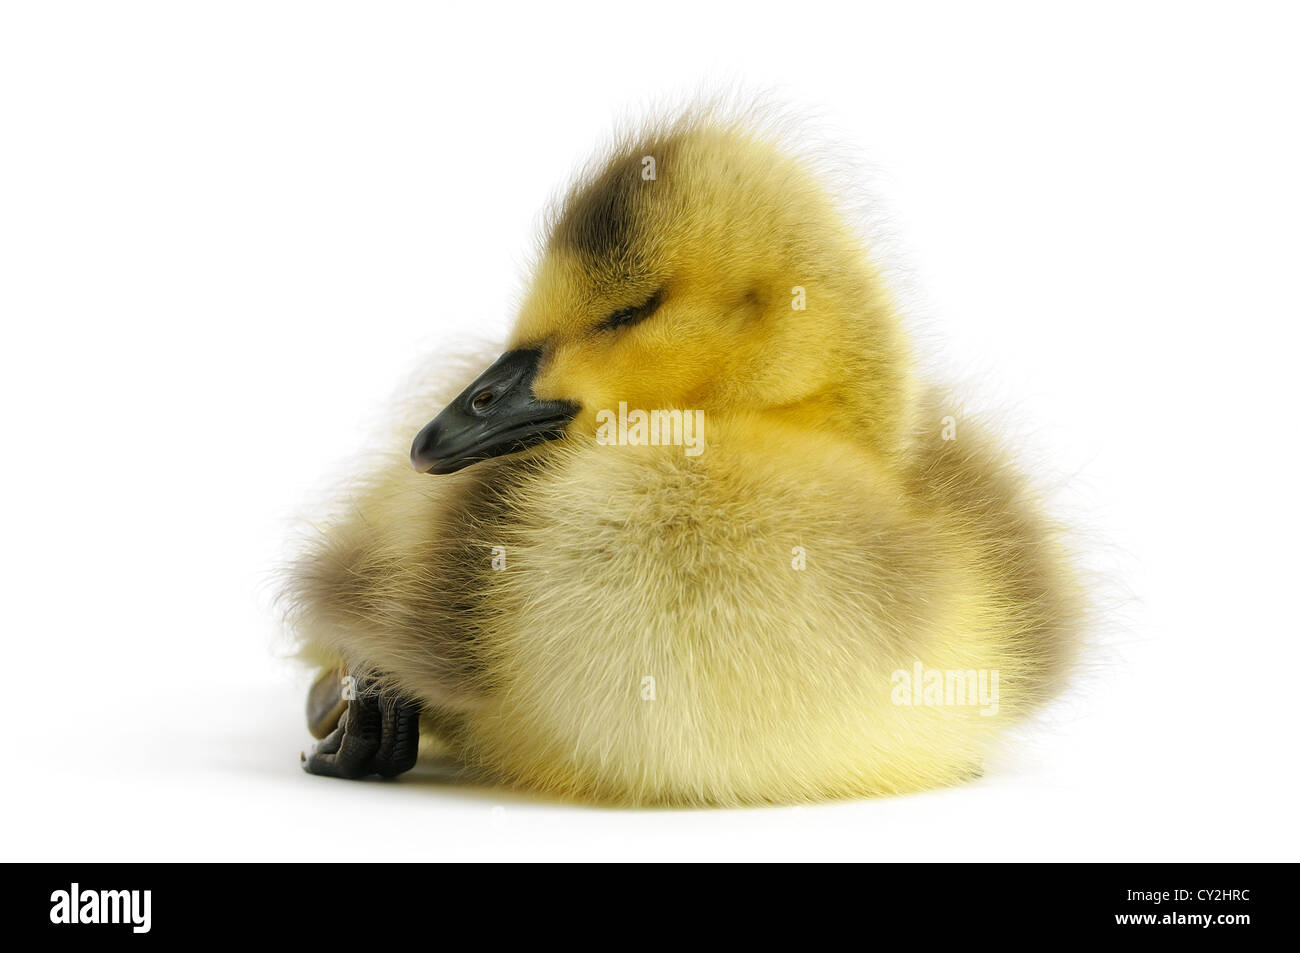 Young yellow Gosling on white background. Stock Photo